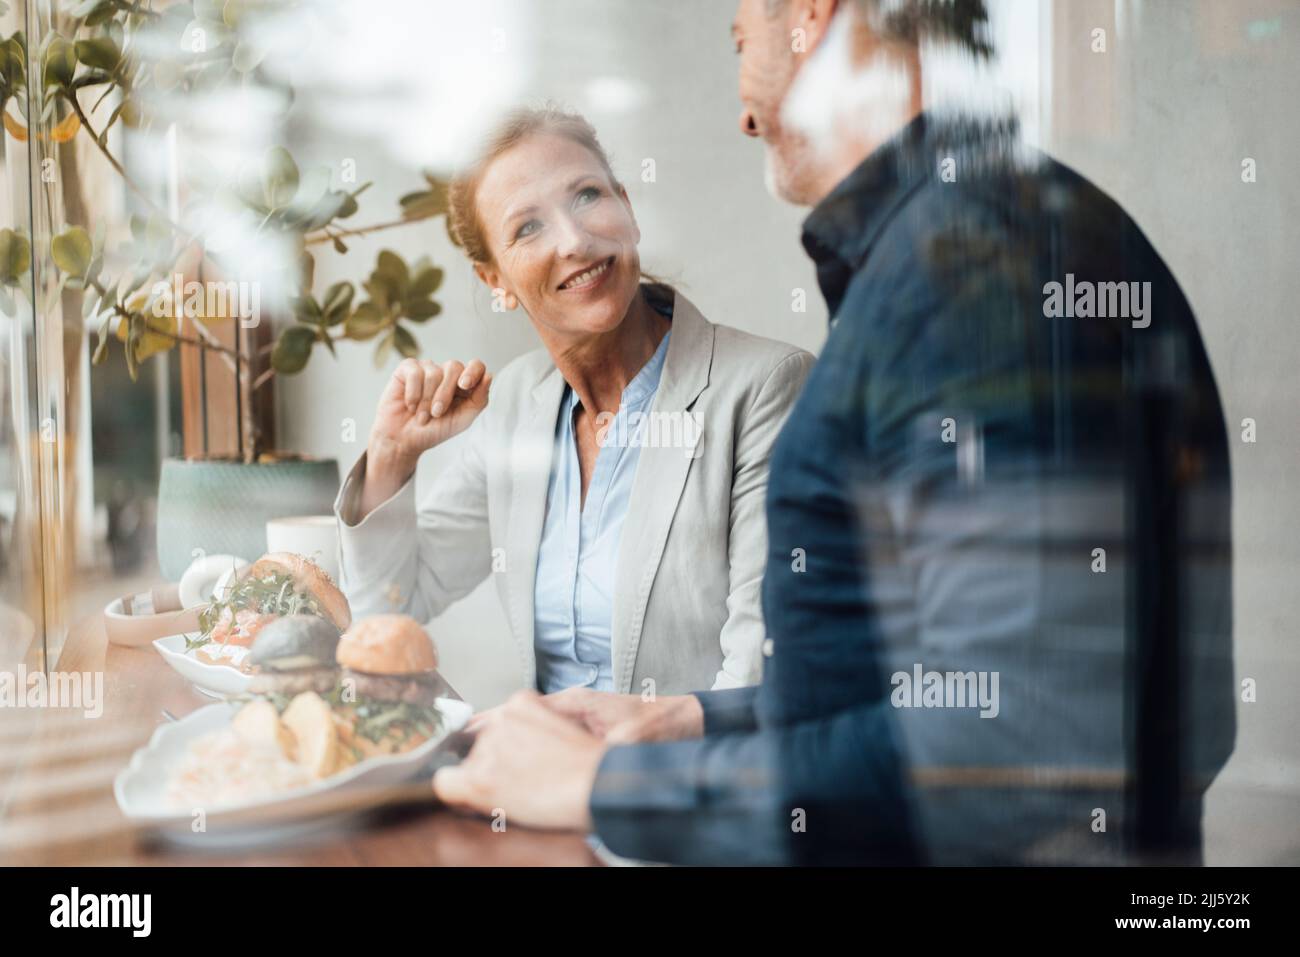 Smiling businesswoman with businessman having lunch in cafe seen through glass Stock Photo